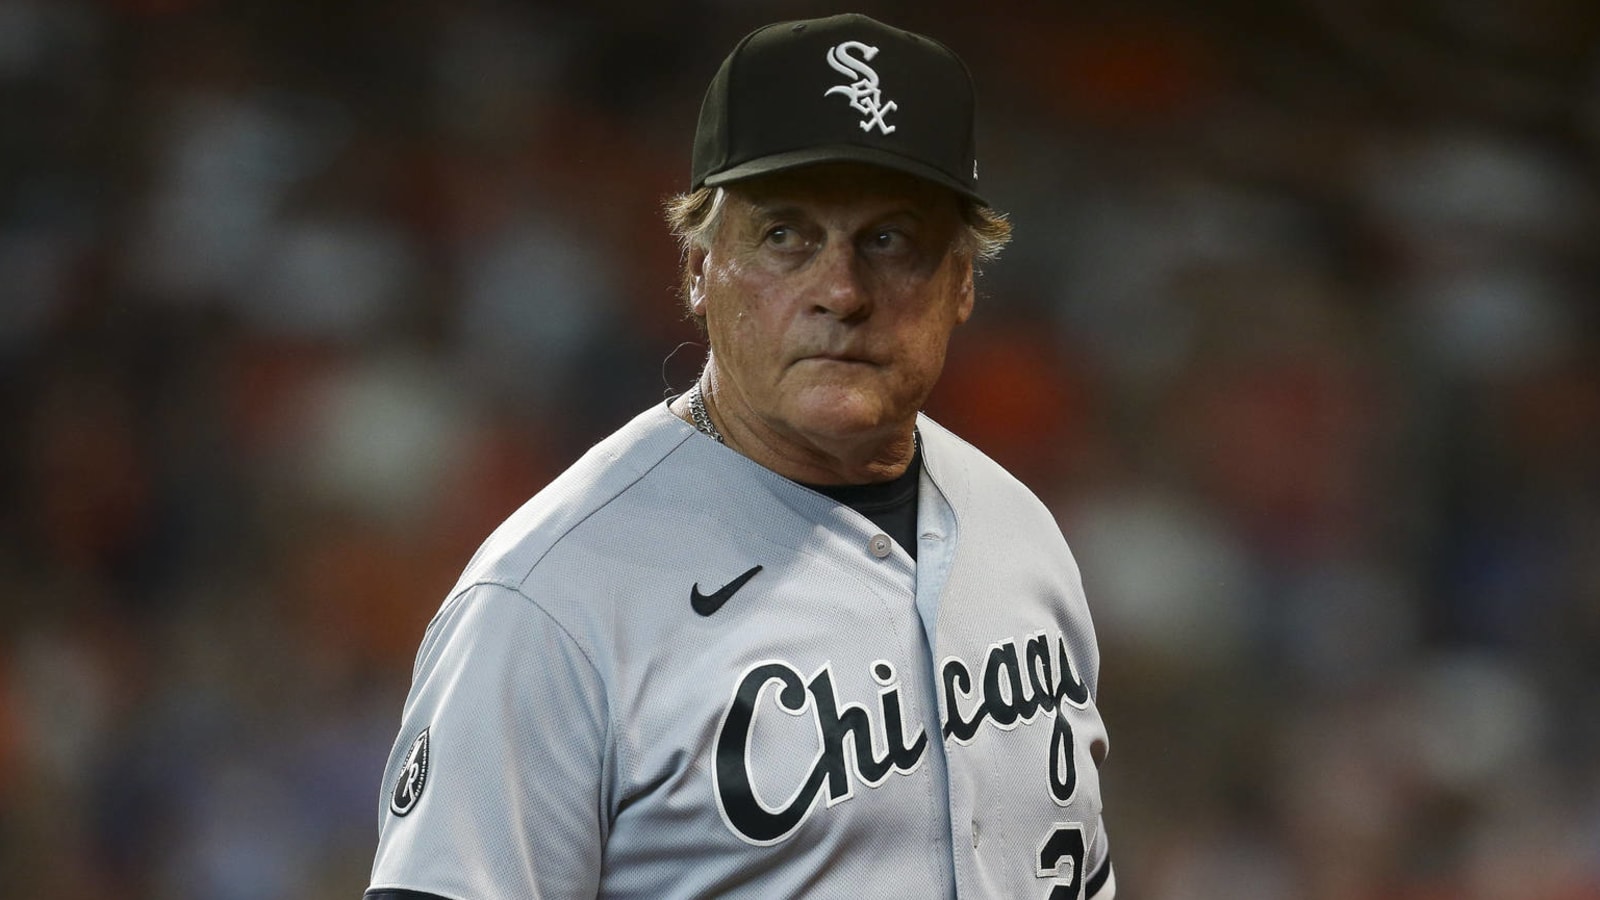 Can White Sox find payroll space to replace Rodon, upgrade elsewhere?